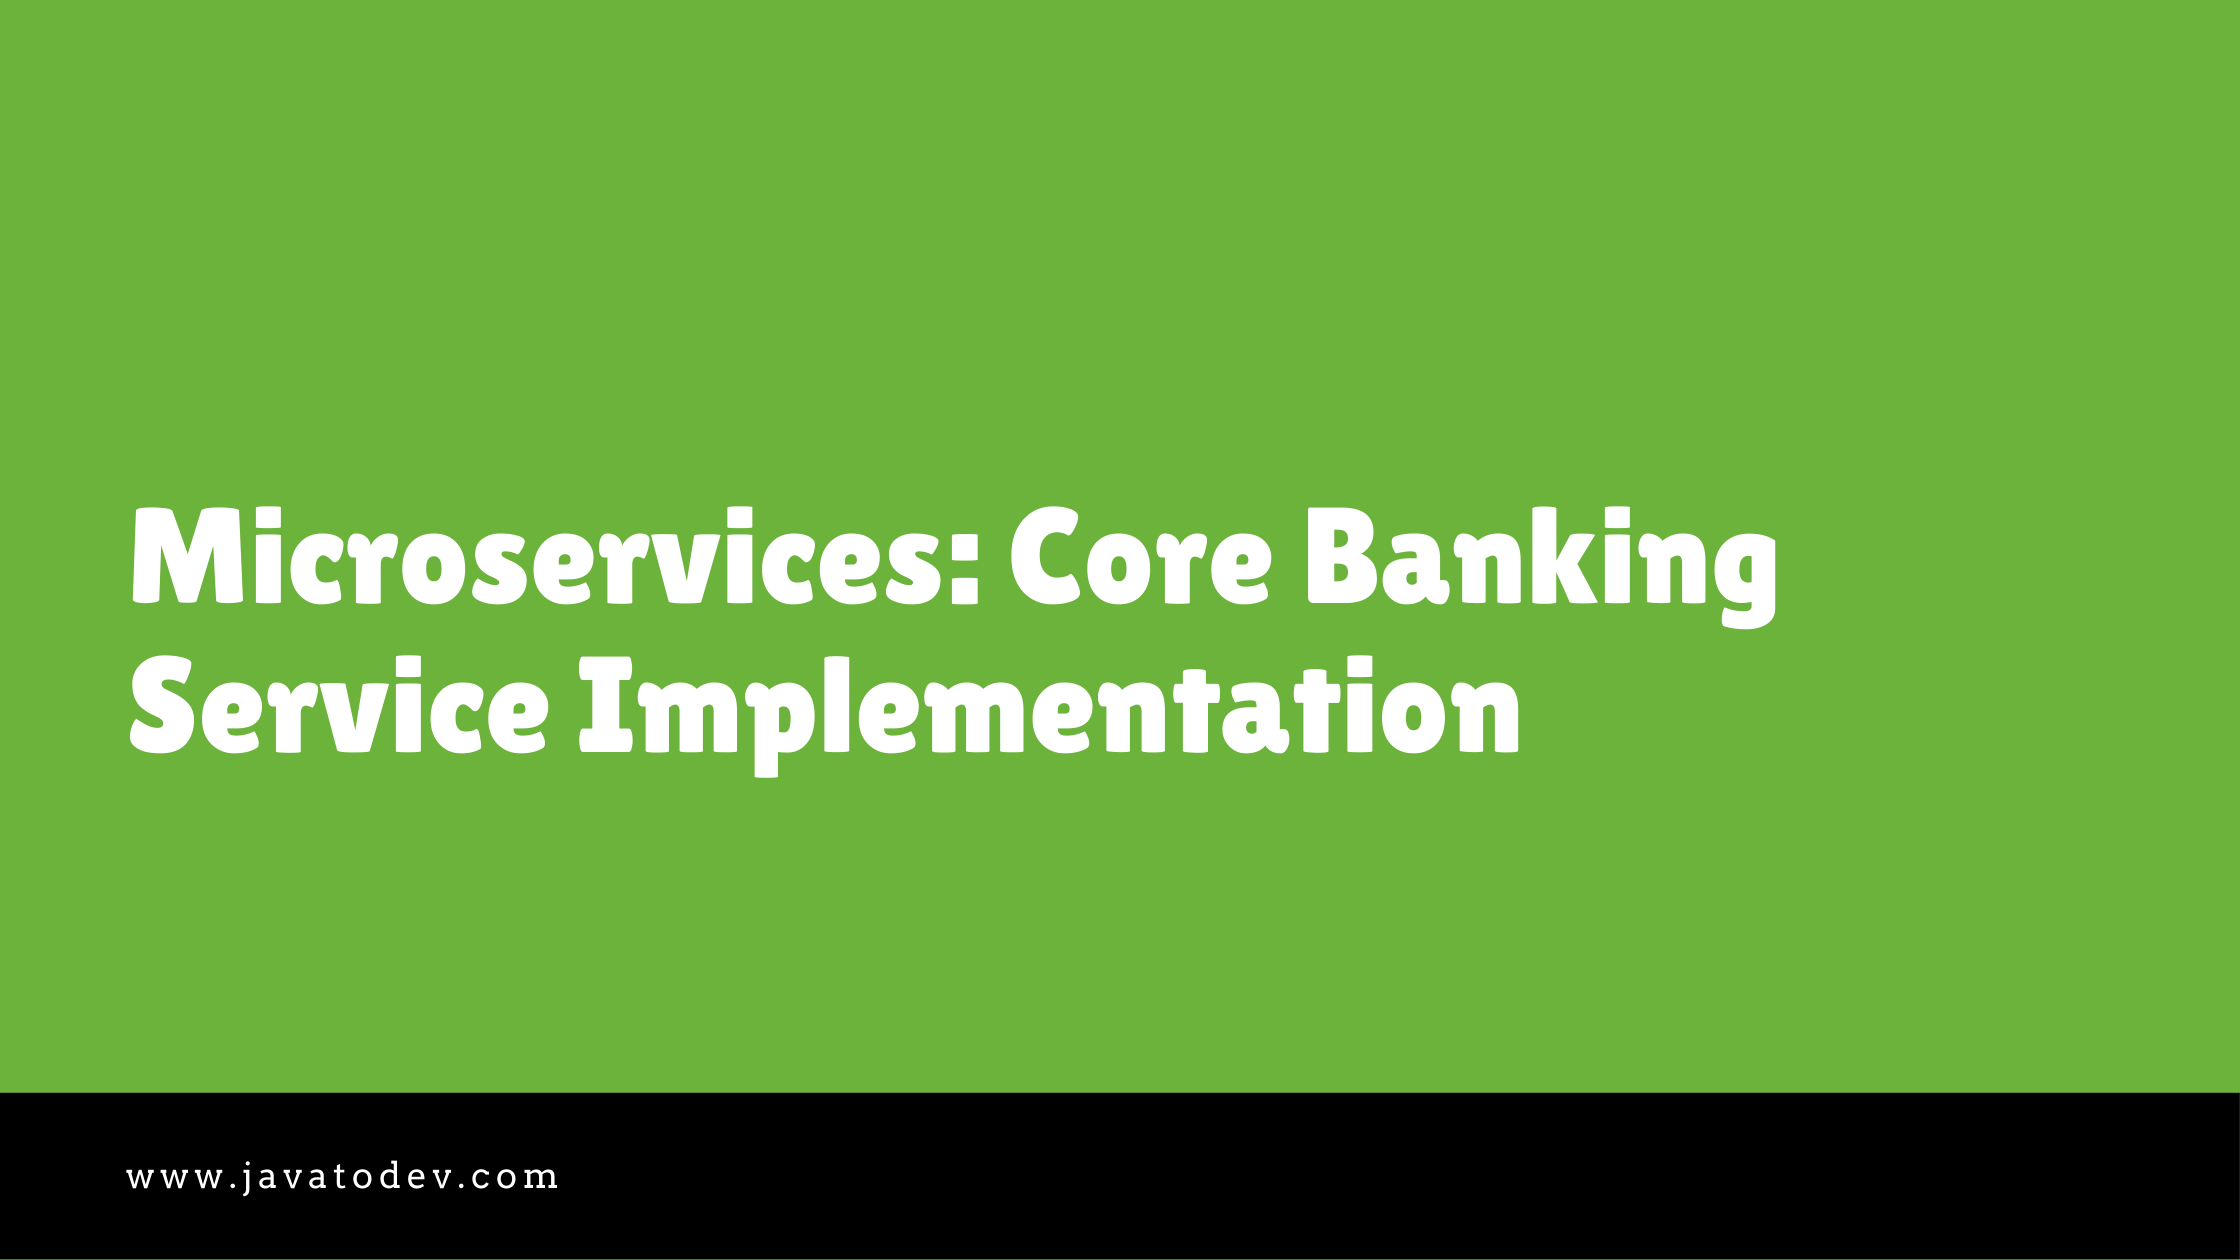 Microservices - Core Banking Service Implementation